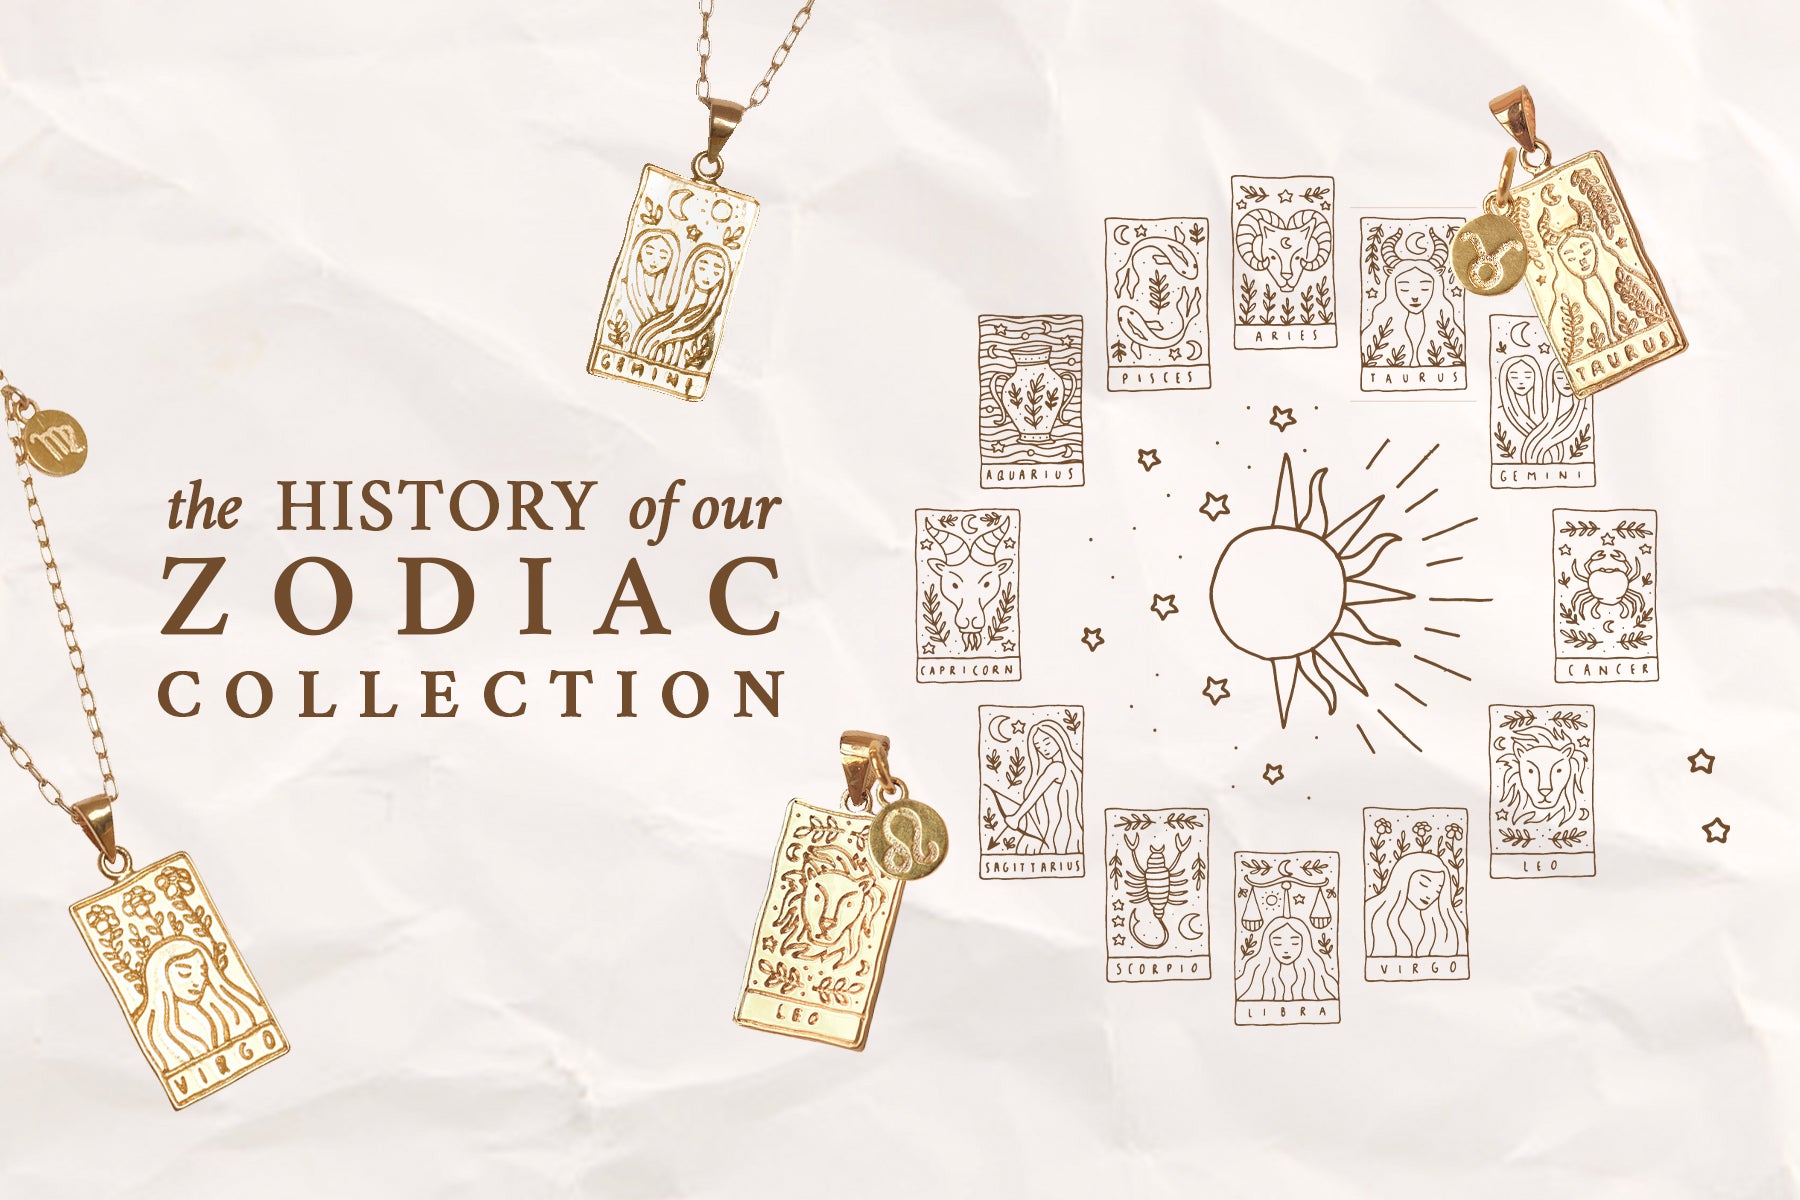 The History of our Zodiac Collection